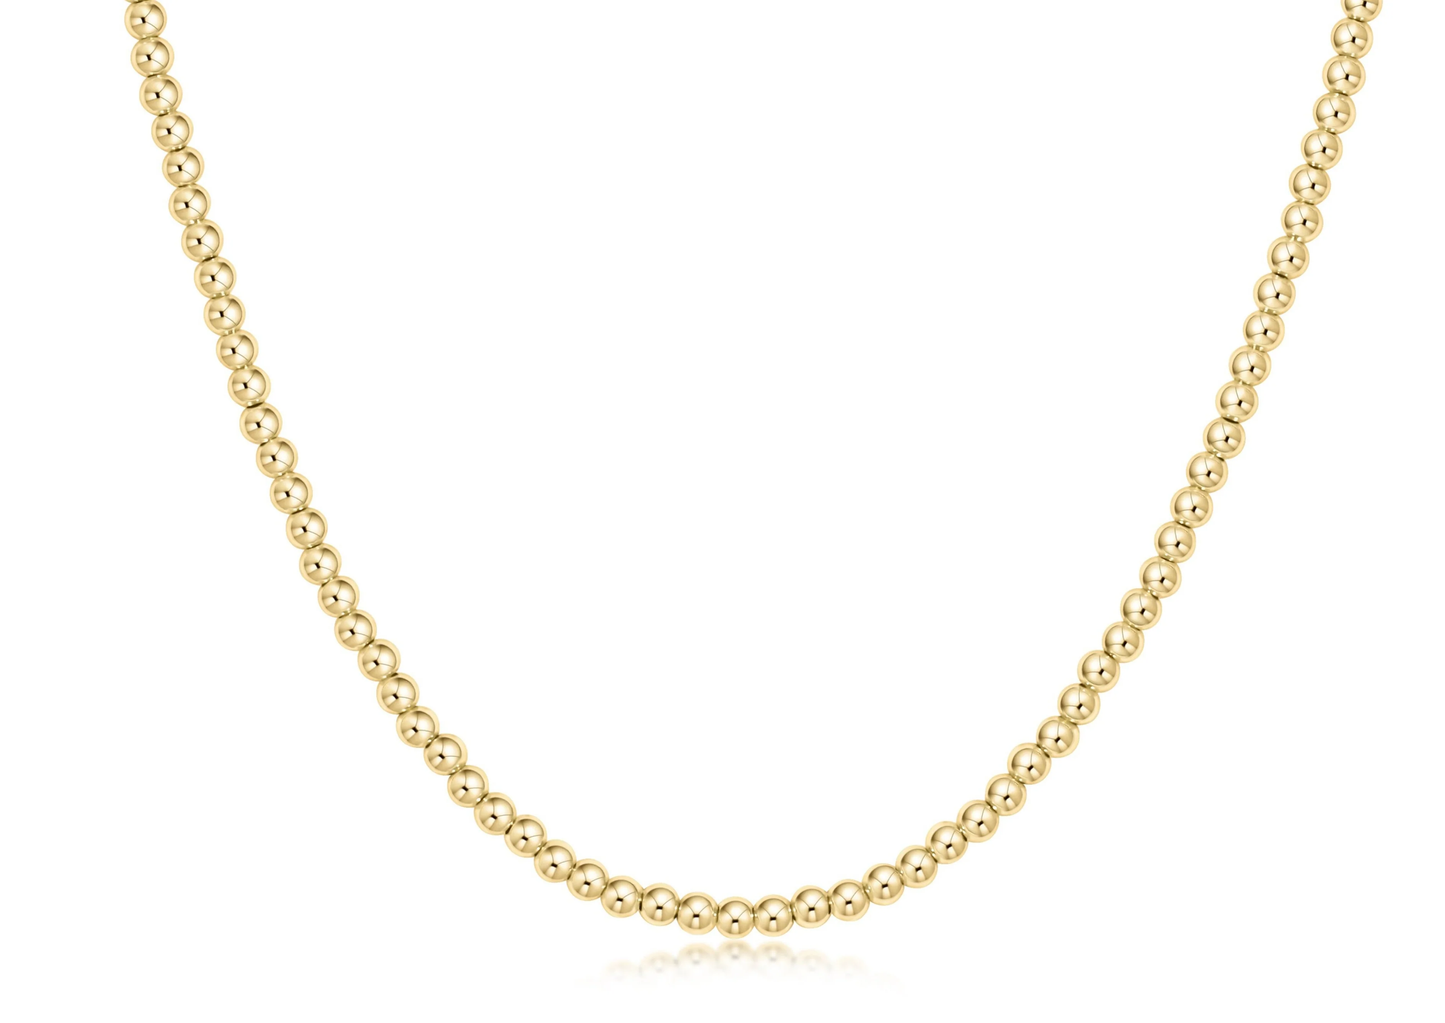 15" Choker Necklace Classic Gold 3mm Beads